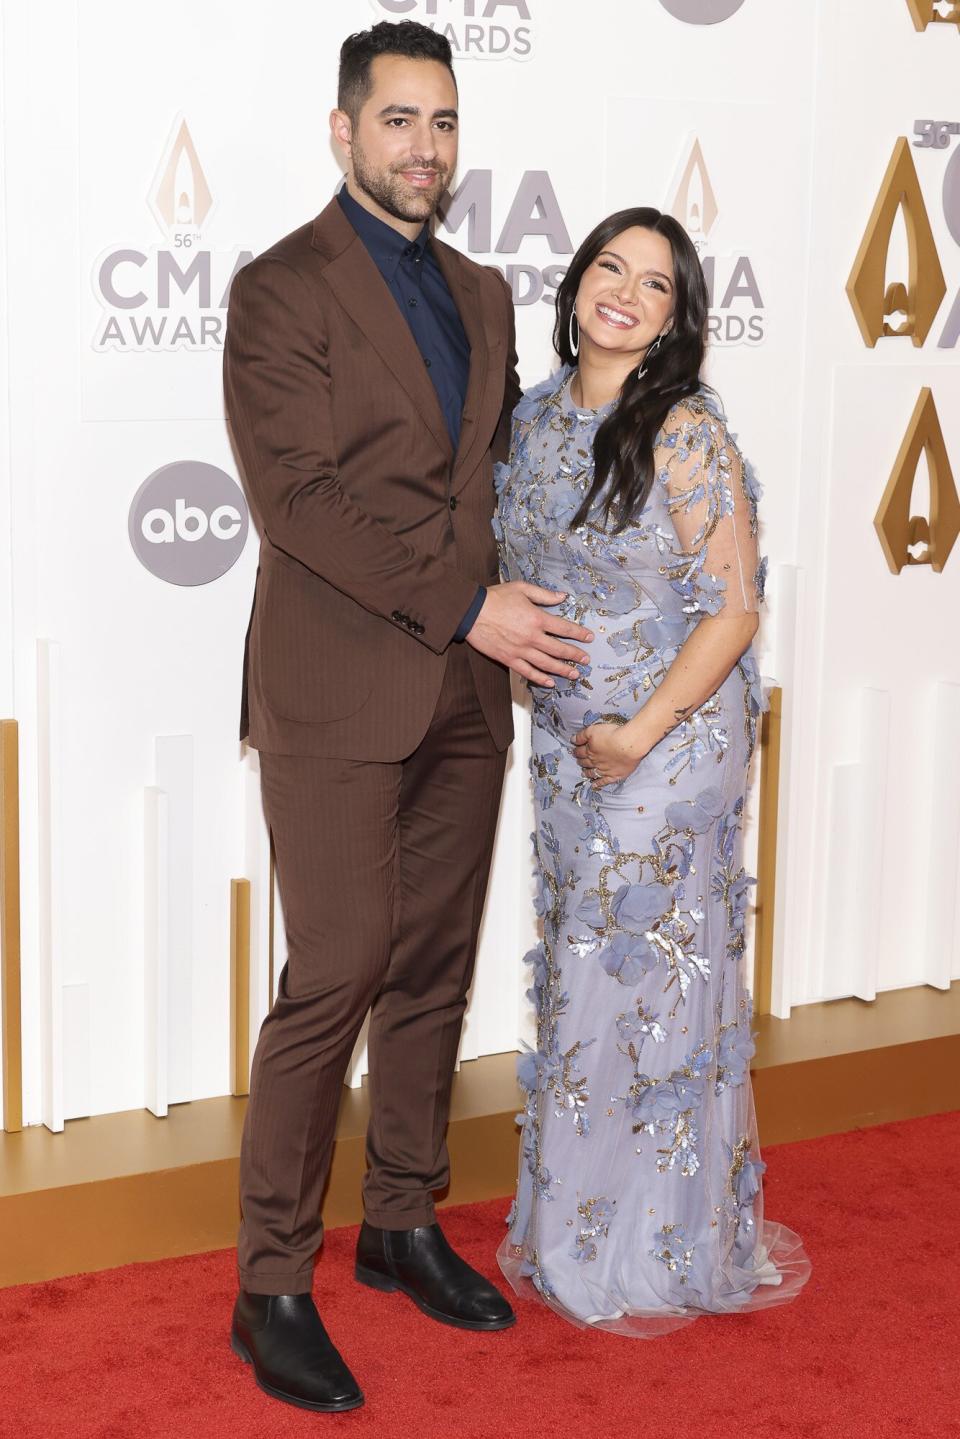 Paul Digiovanni and Katie Stevens attend The 56th Annual CMA Awards at Bridgestone Arena on November 09, 2022 in Nashville, Tennessee